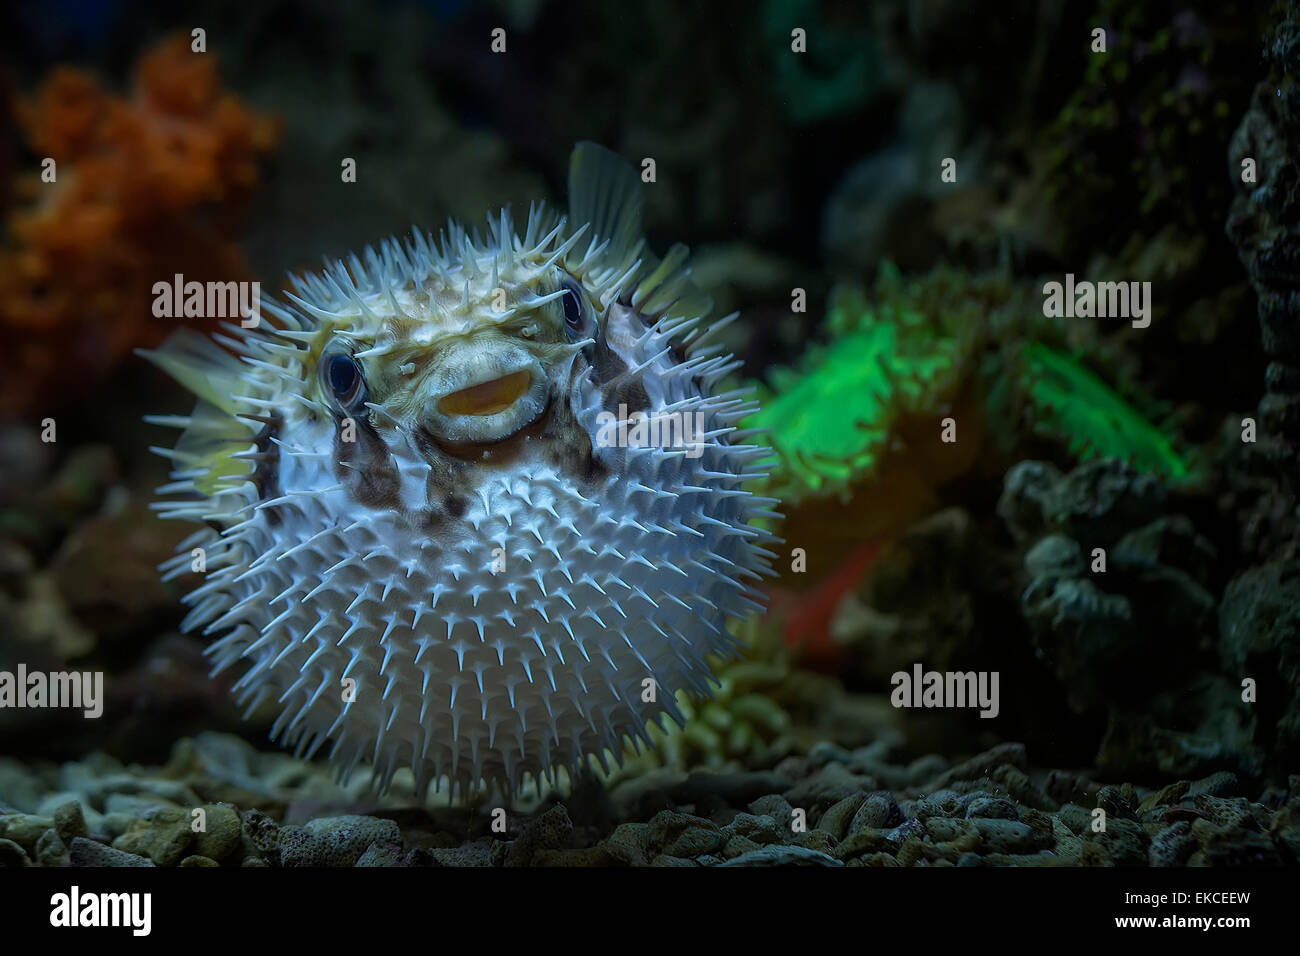 Close-up portrait of a Puffer fish underwater Stock Photo